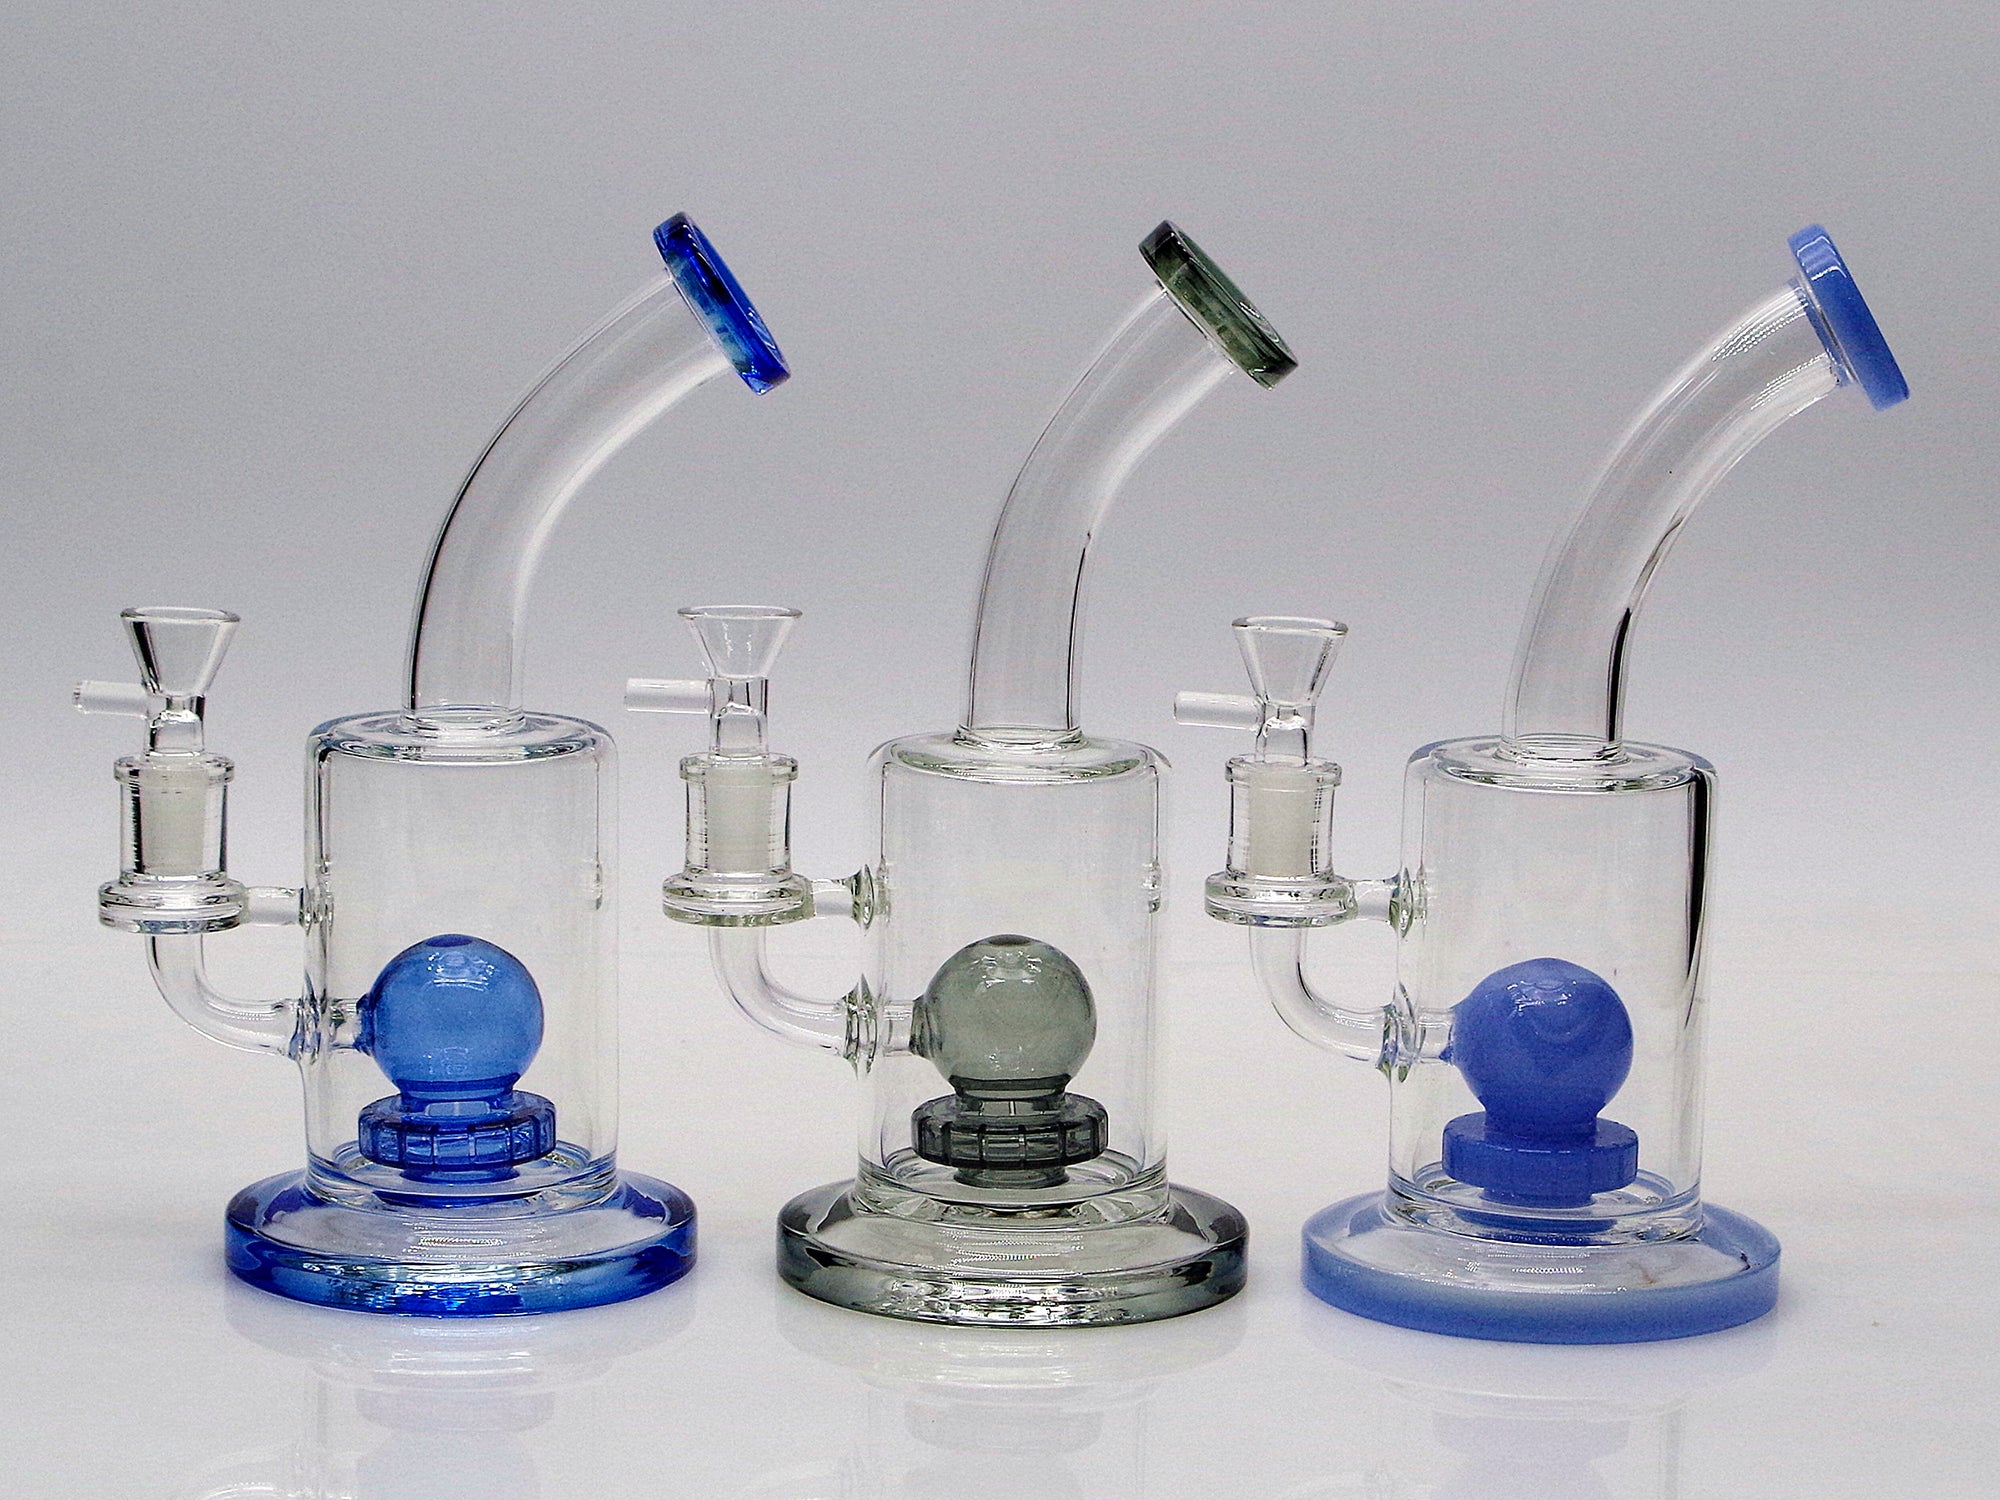 Banger Hanger with Internal Ball and Perc (Online Only)